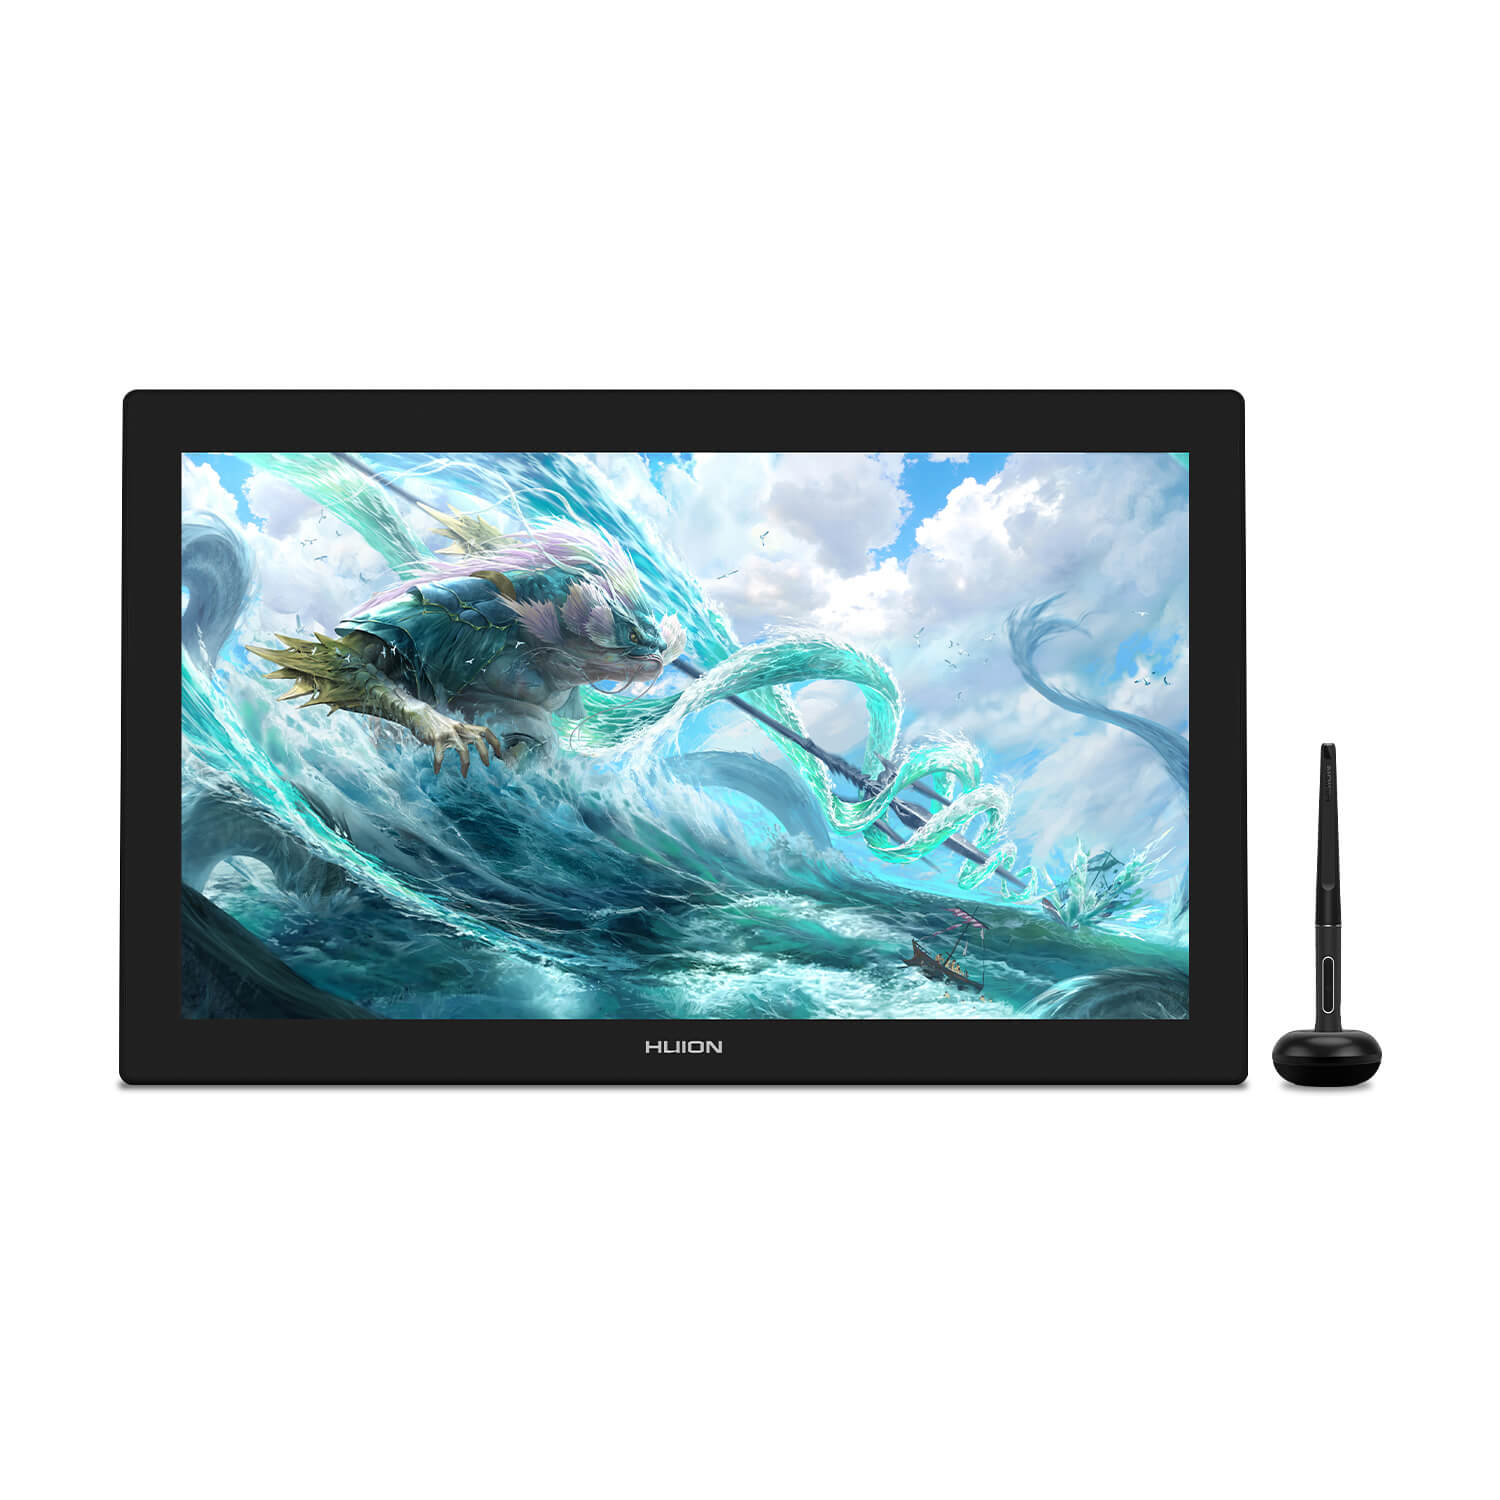 Kamvas Pro 24 (4K) UHD Pen Display with ST410 for Professional